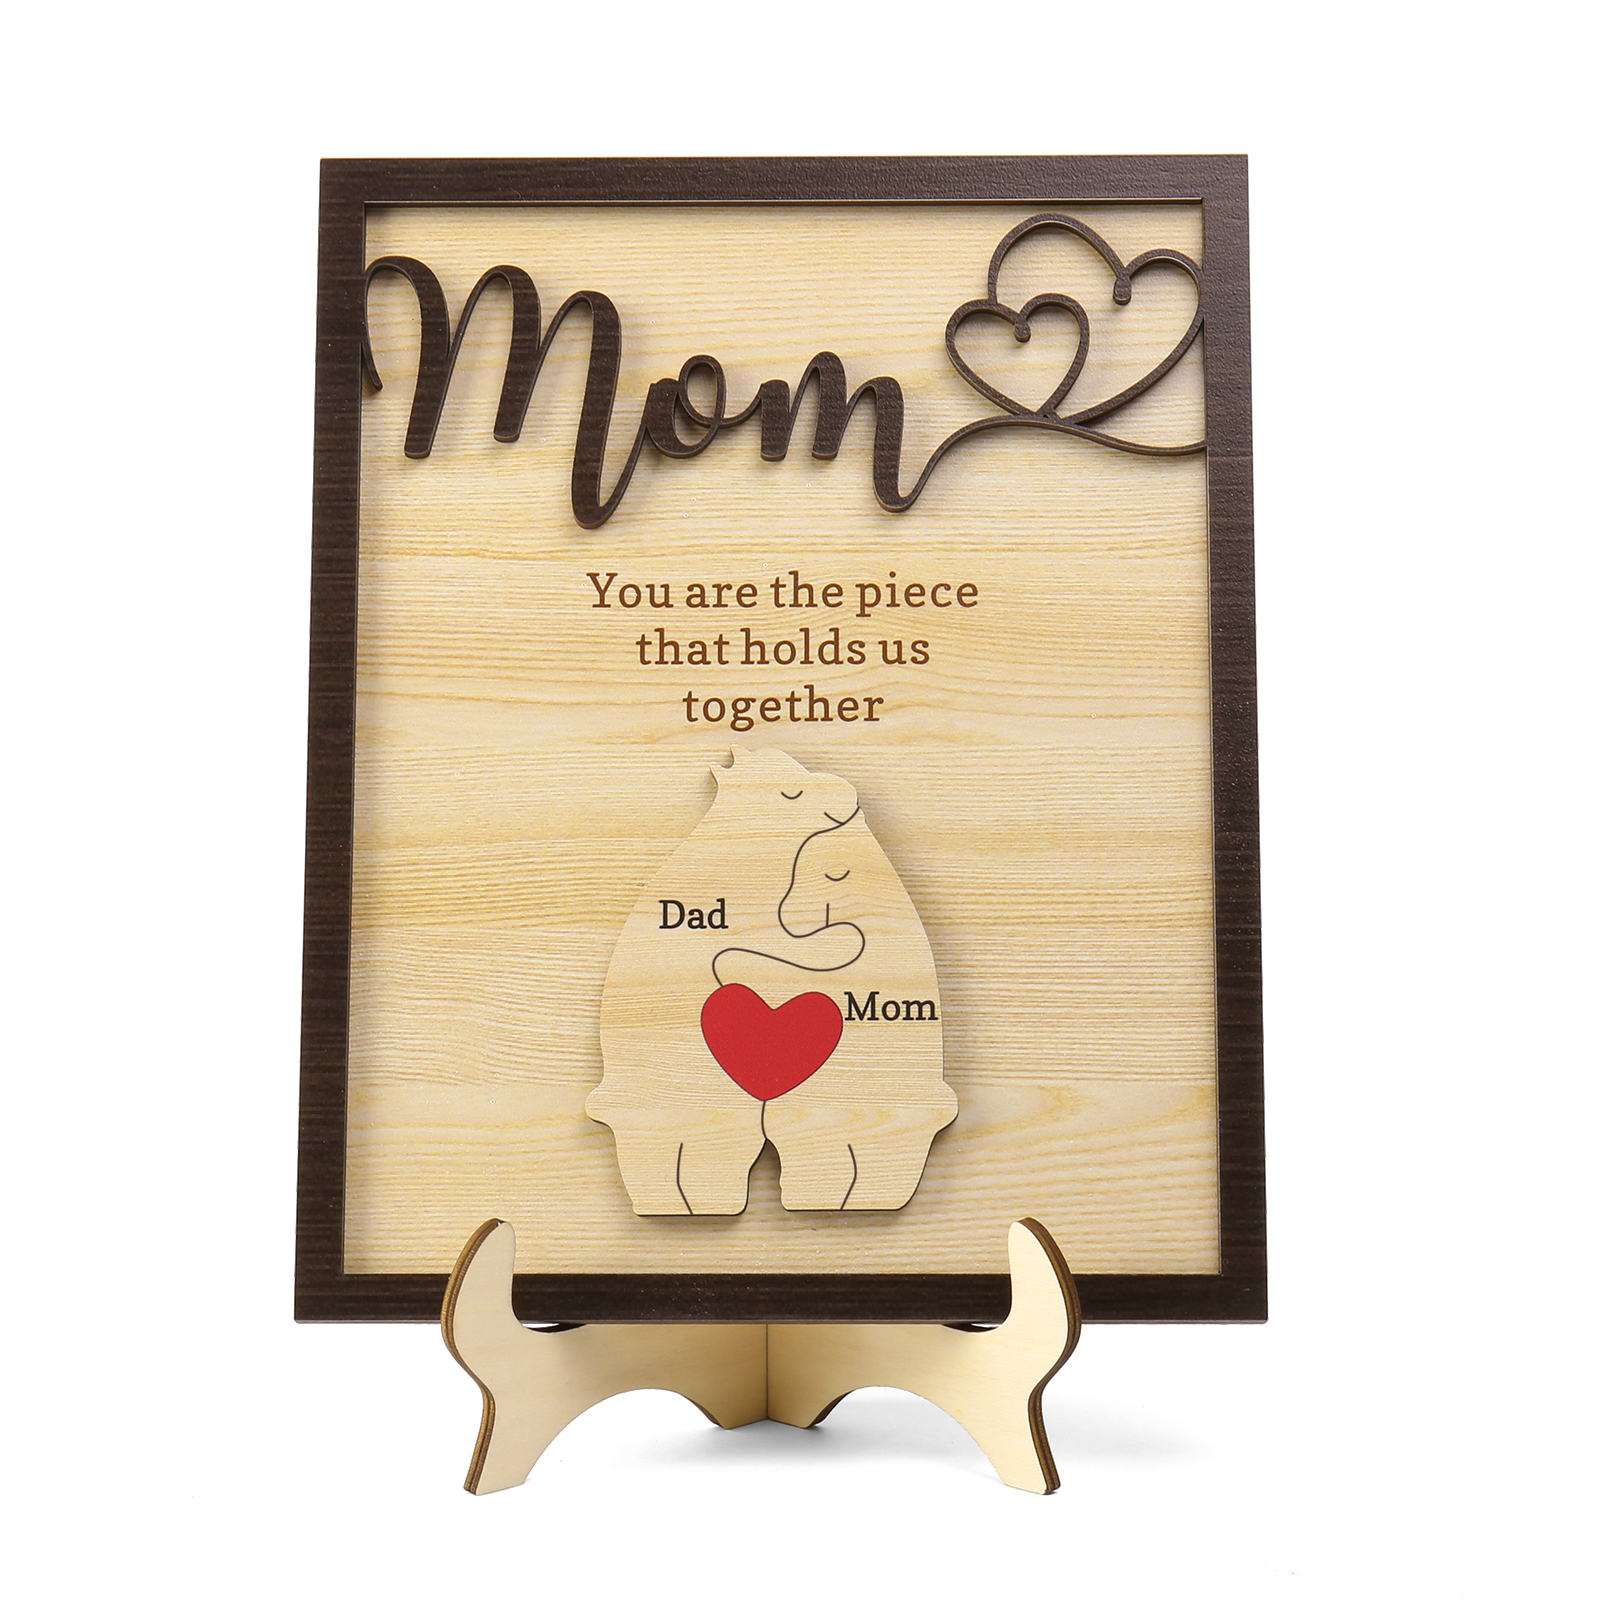 2 Names - Personalized Home Frame Wooden Ornaments Cute Bear Style Customizable 2 Text Ornaments For Mom